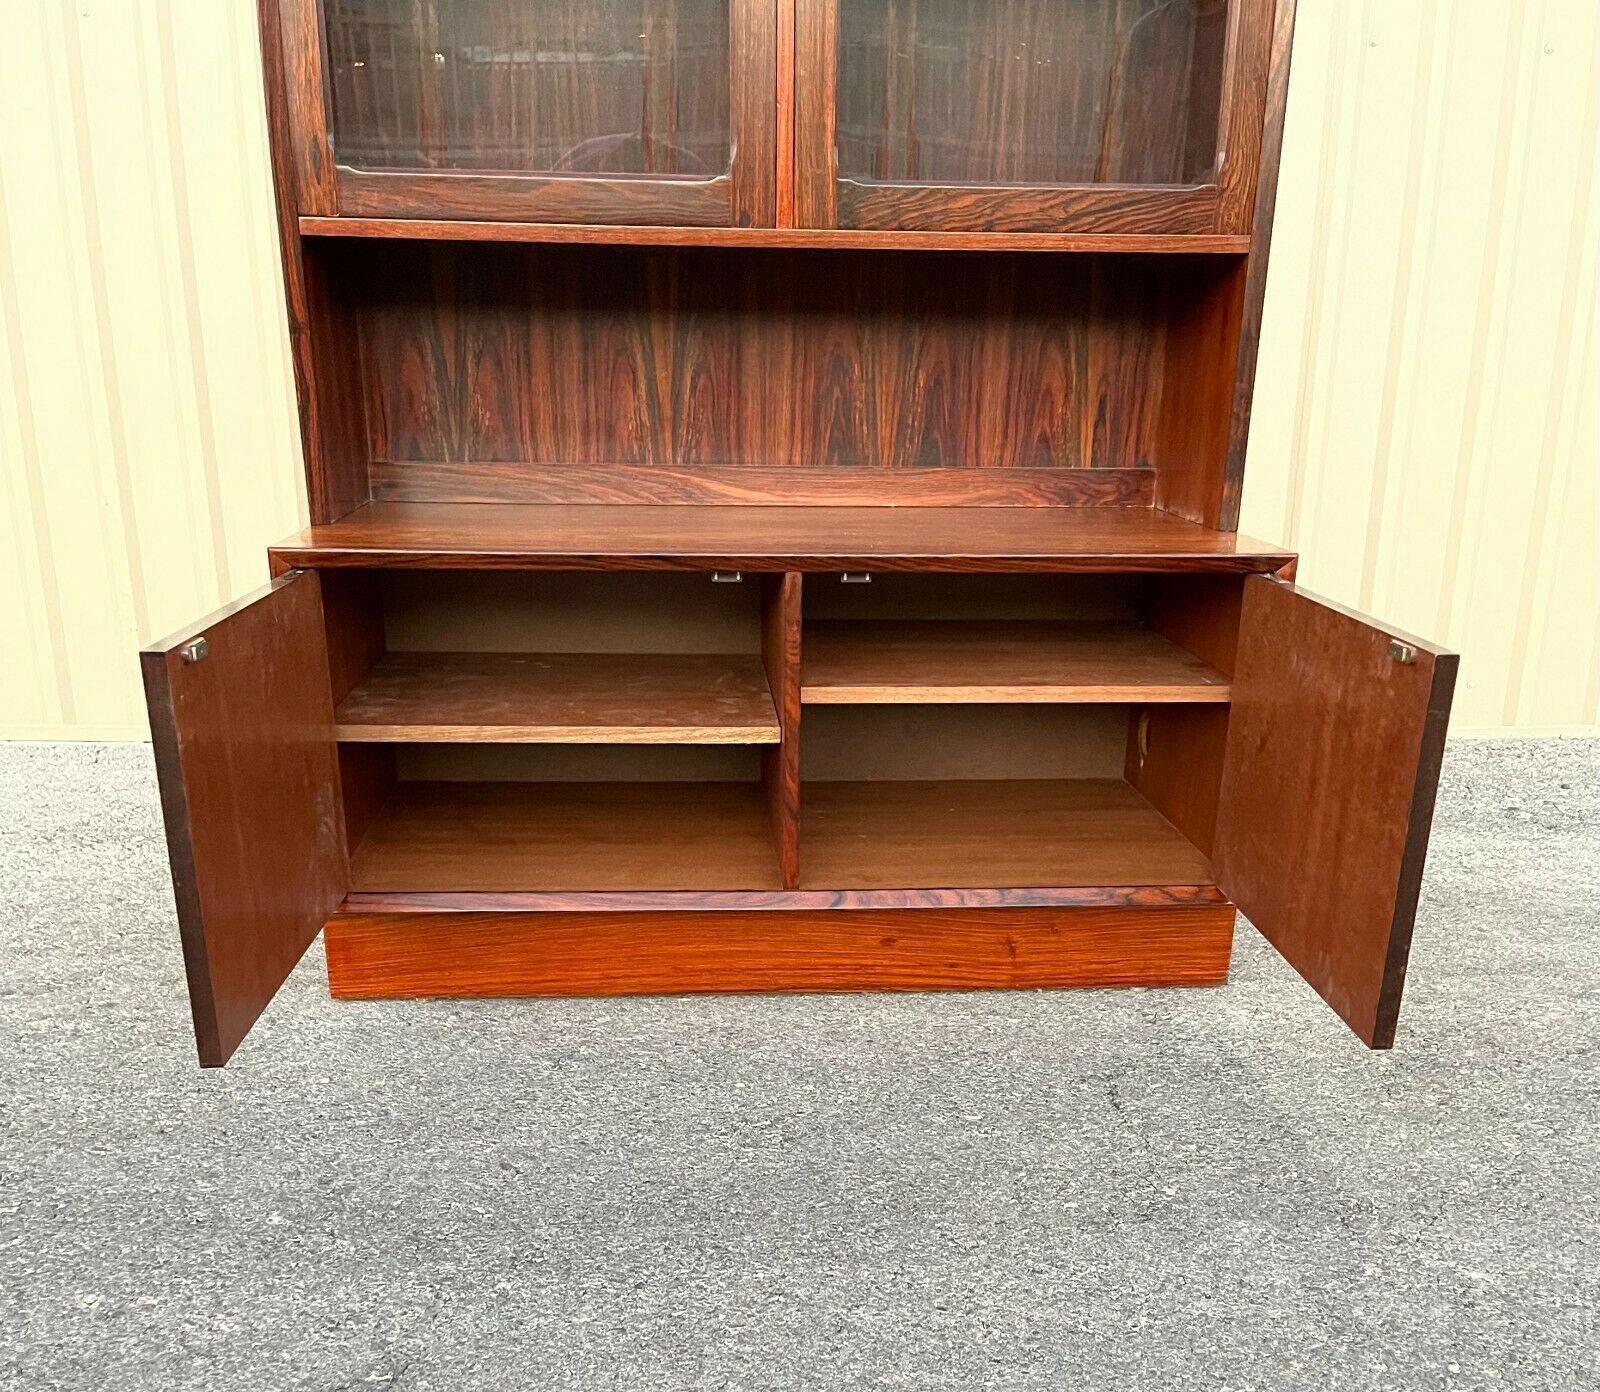 A Beautiful Danish modern rosewood display cabinet in 2 parts, designed by Erik Brouer for Brouer Møbelfabrik, Denmark, in the 1970s. It has very stunning wood grain and is refined in every detail. It is very beautifully made with 2 cabinet doors in